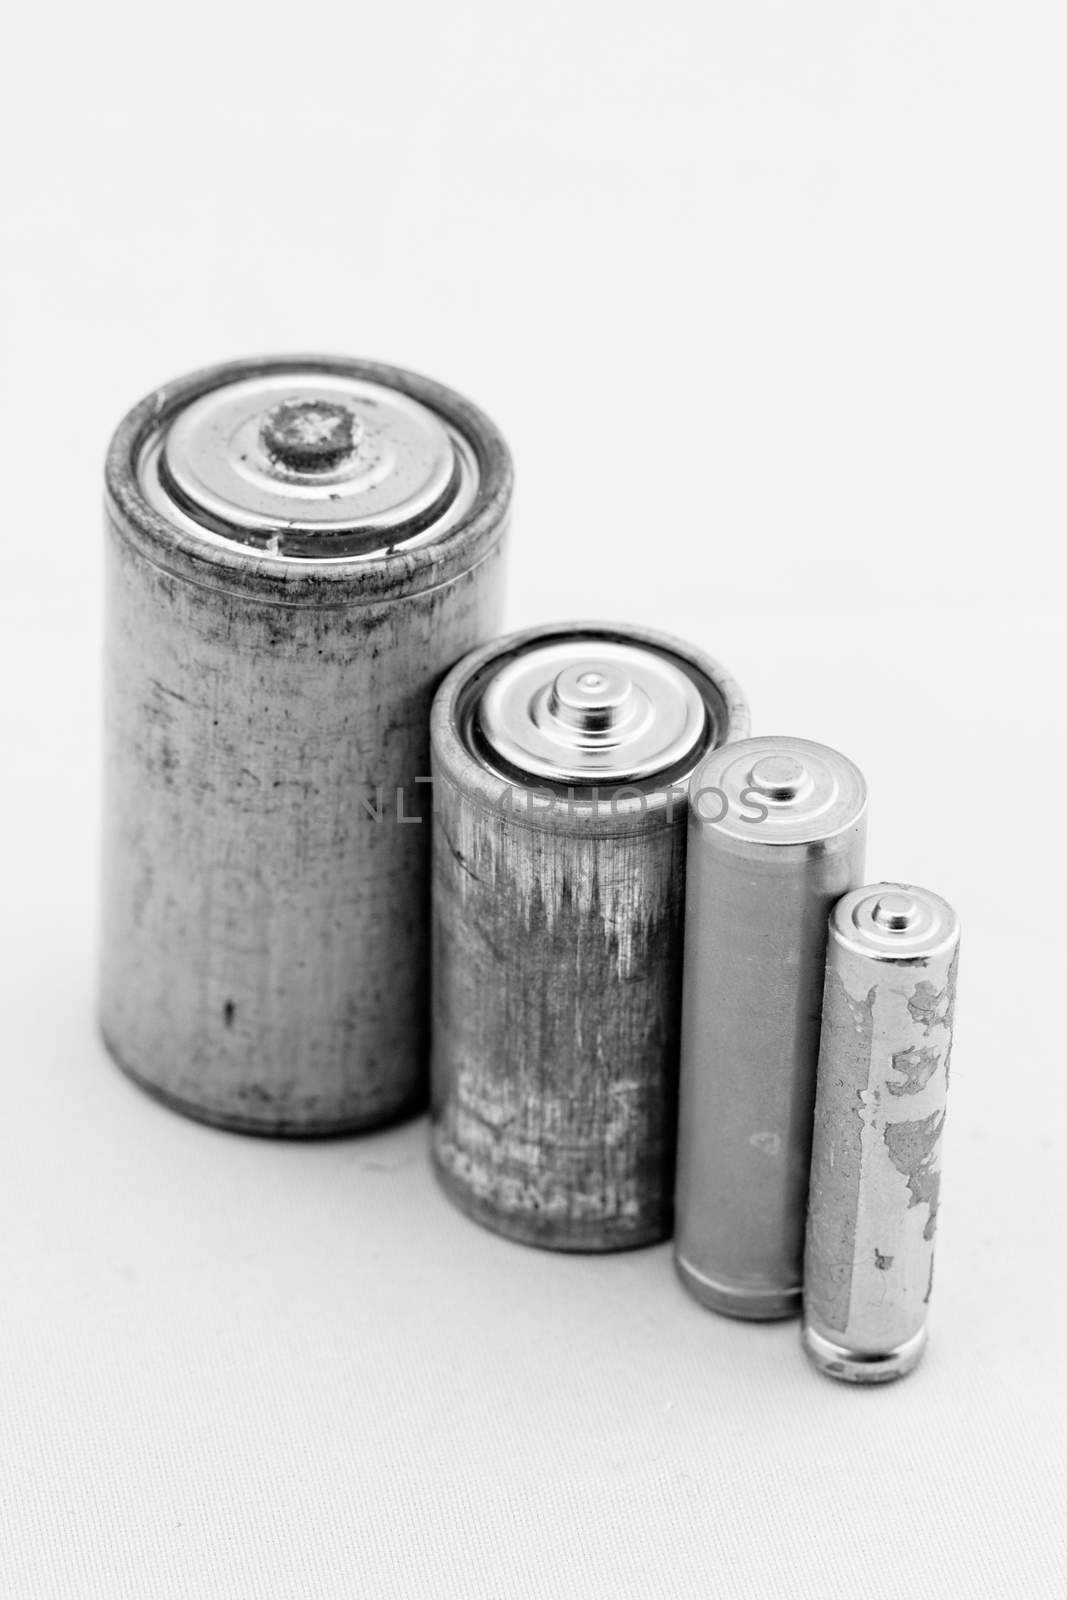 Old batteries on white background by NagyDodo